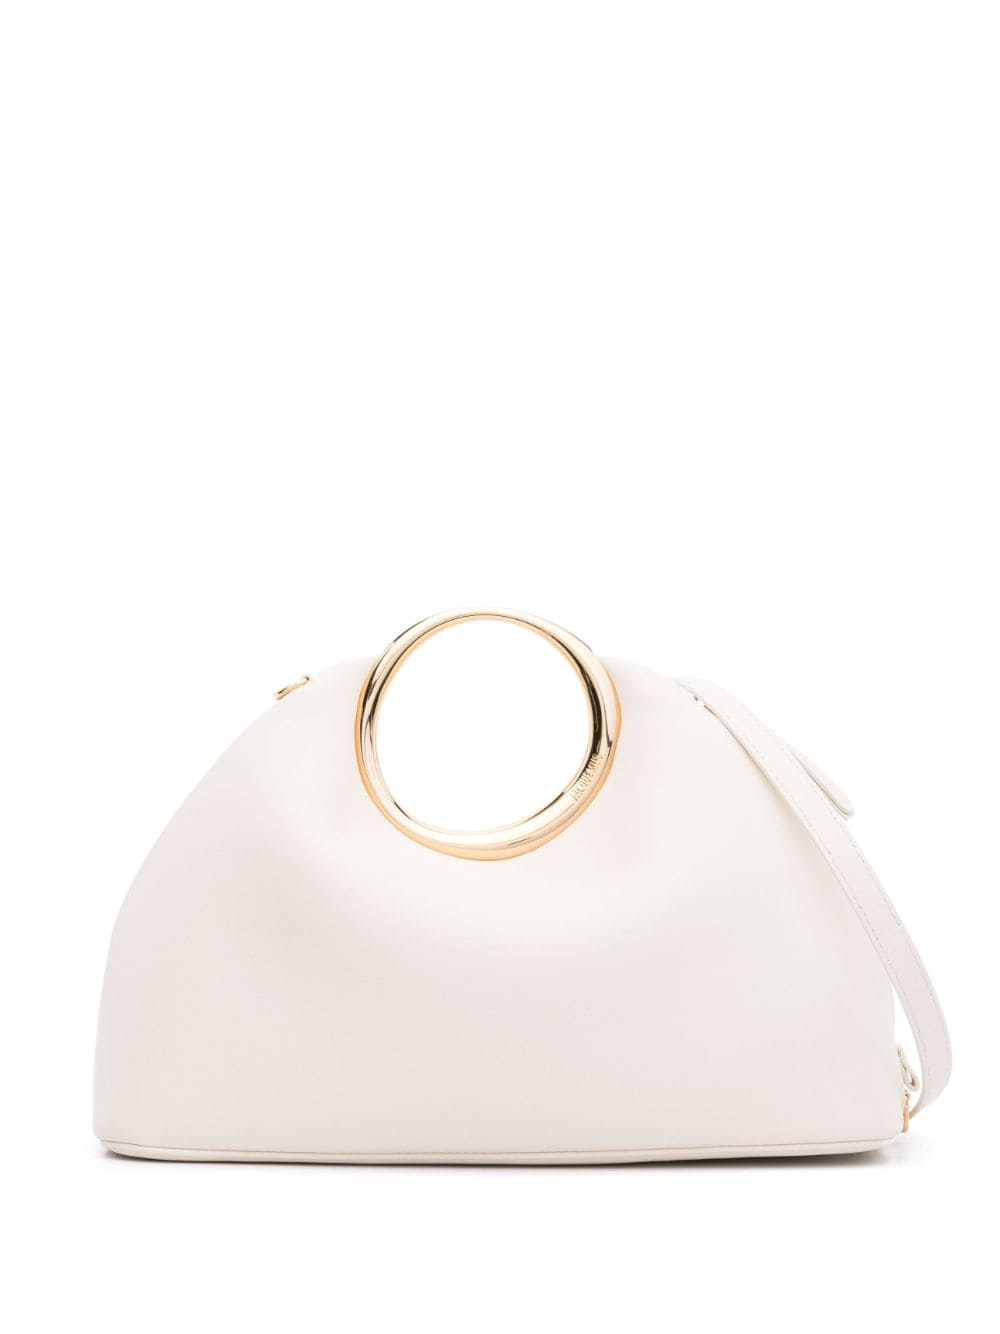 Jacquemus Le Calino Leather Tote Bag In White